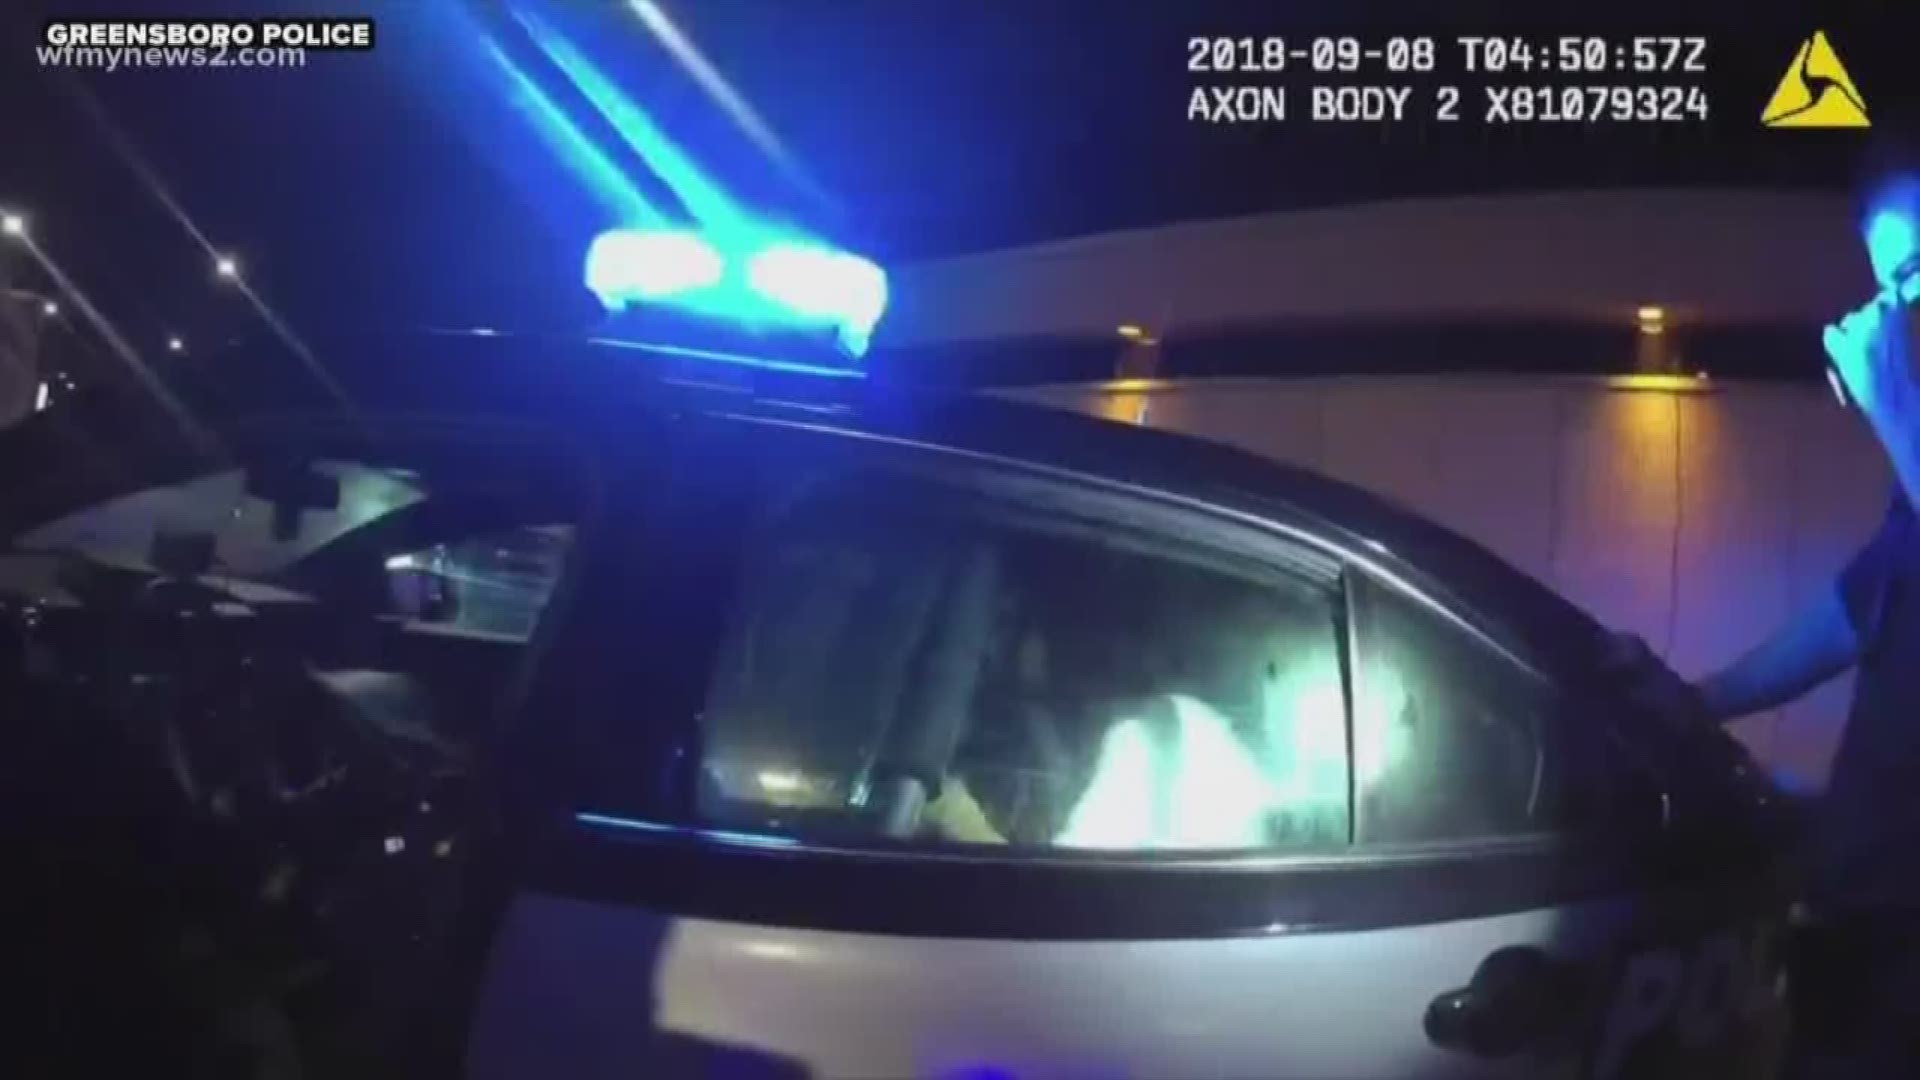 Greensboro Police release body cam video of the night a man died in their custody. We take a detailed look at the incident.